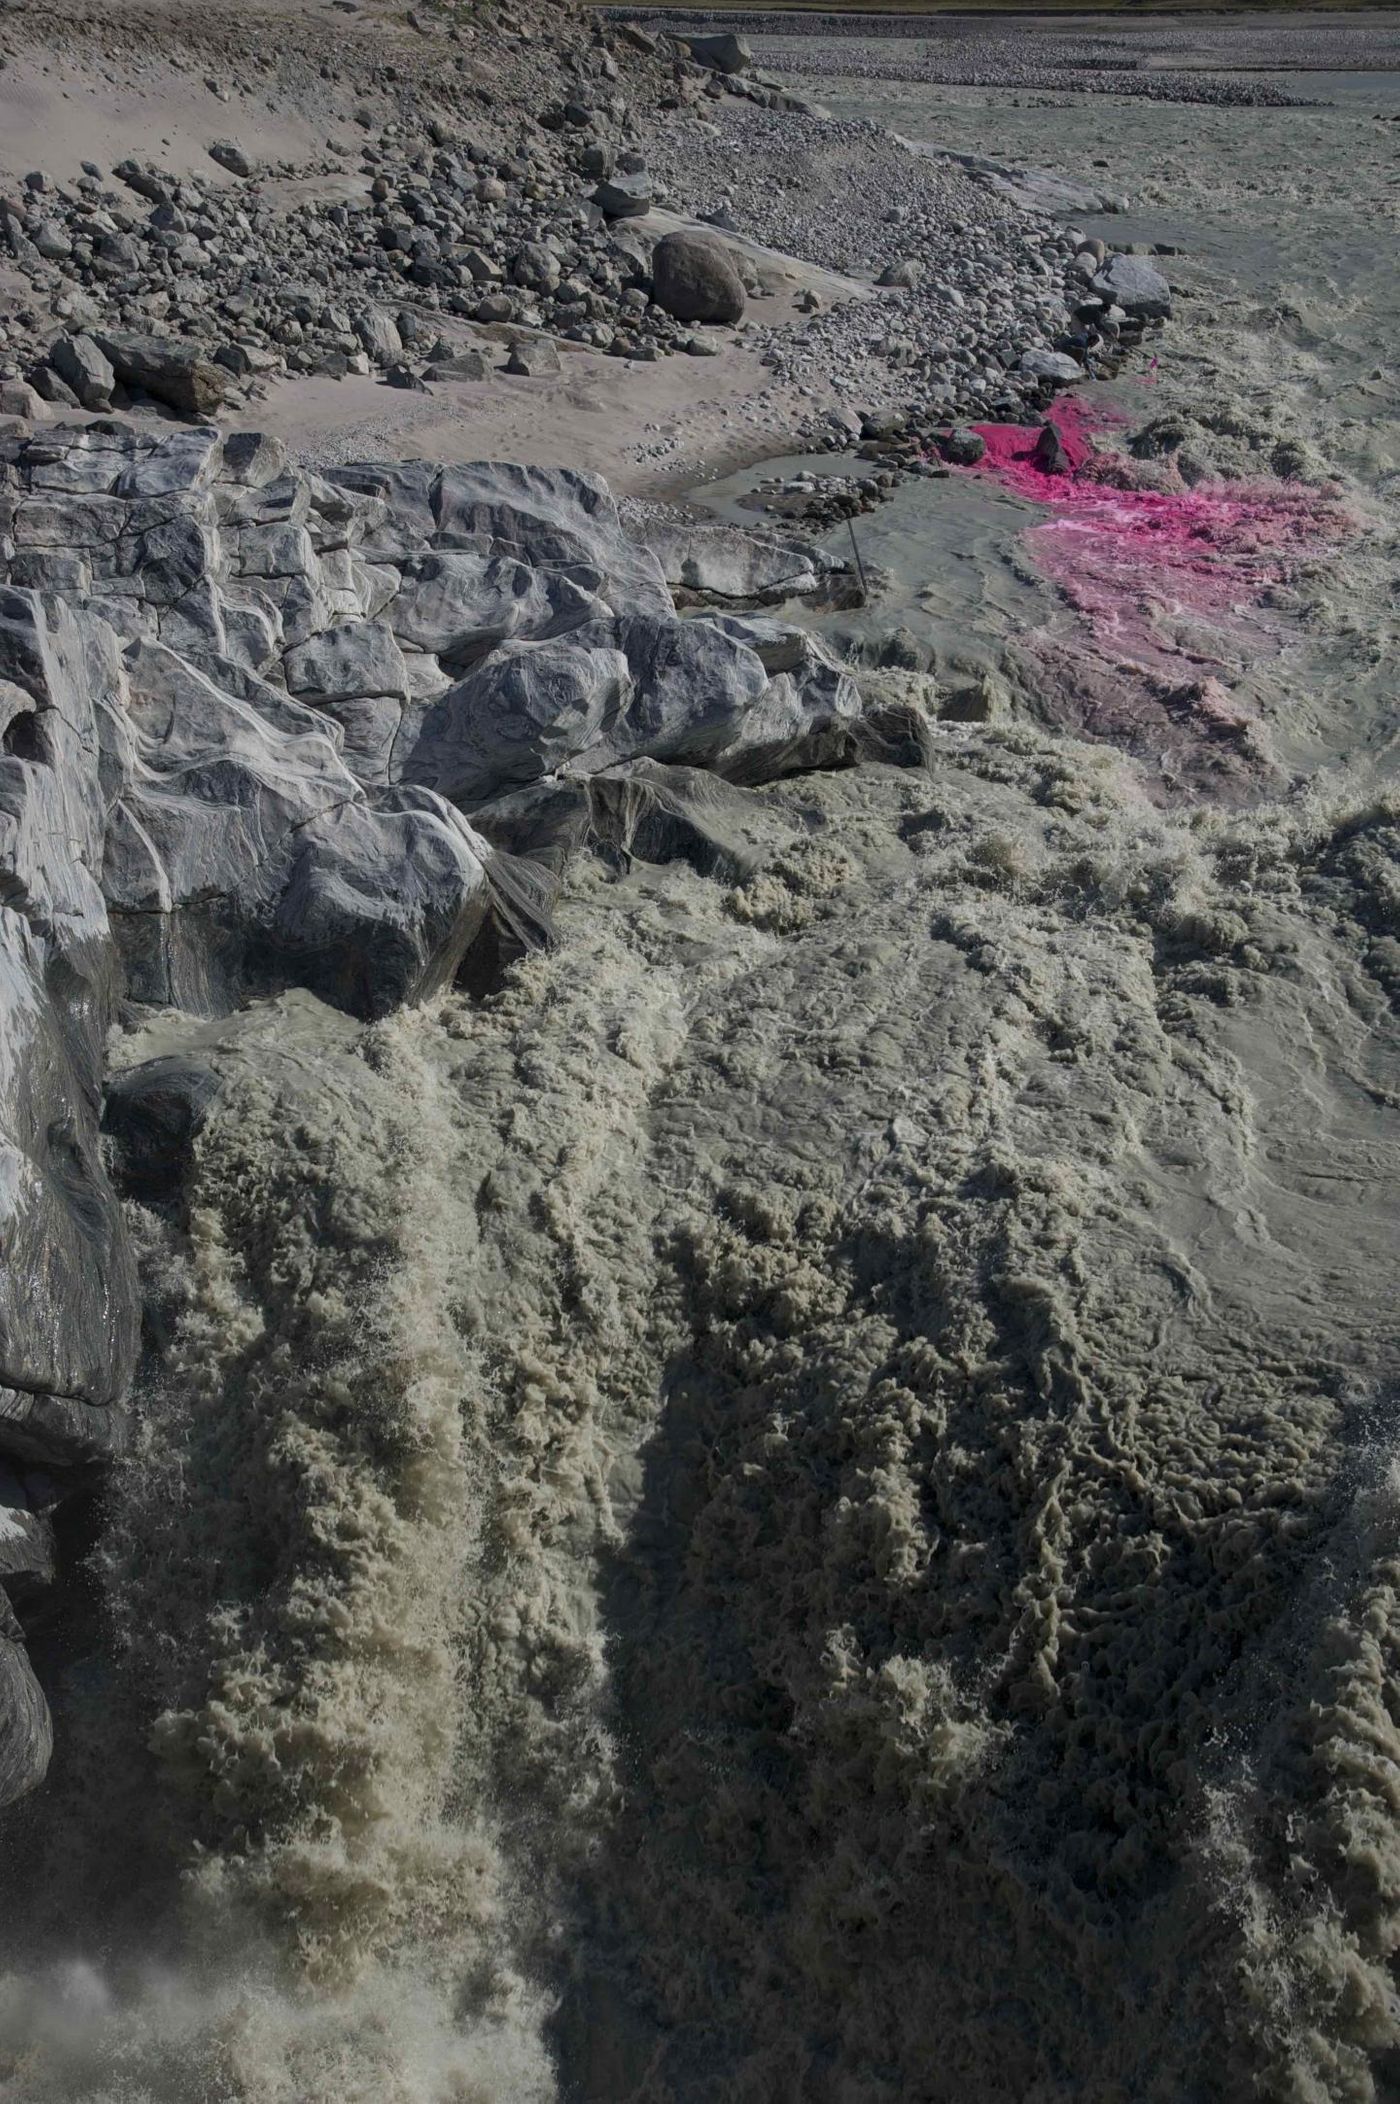 This photo shows a rhodamine dye injection into the proglacial river, just before a waterfall. The pink dye (the rhodamine) is used to calculate the water discharge of the proglacial river (i.e. how much water/melt if flowing in the river at that time). / Credit: Jakub D Zarsky